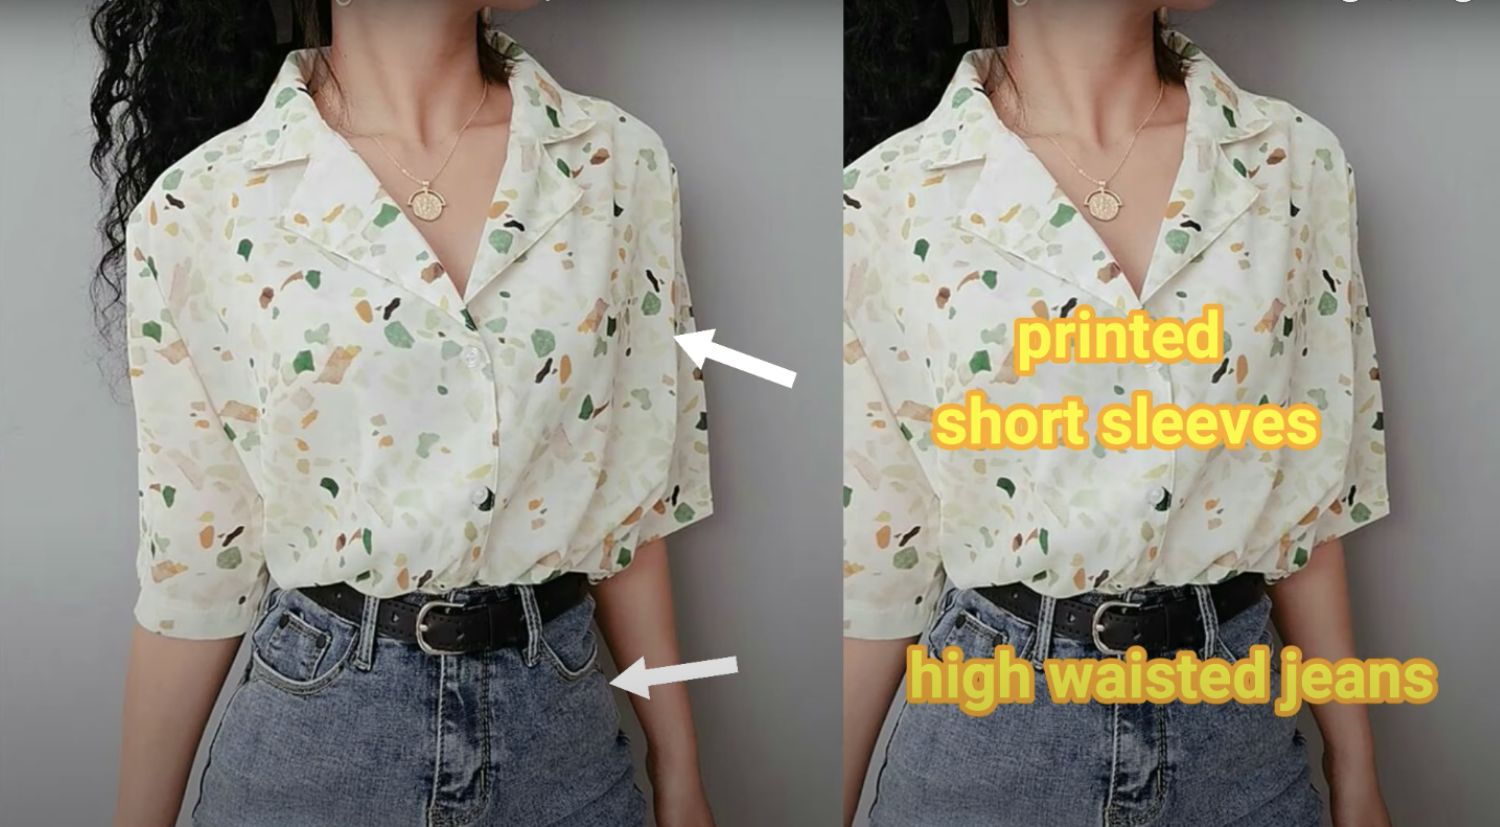 outfit of Printed Short Sleeves, High Waisted Jeans